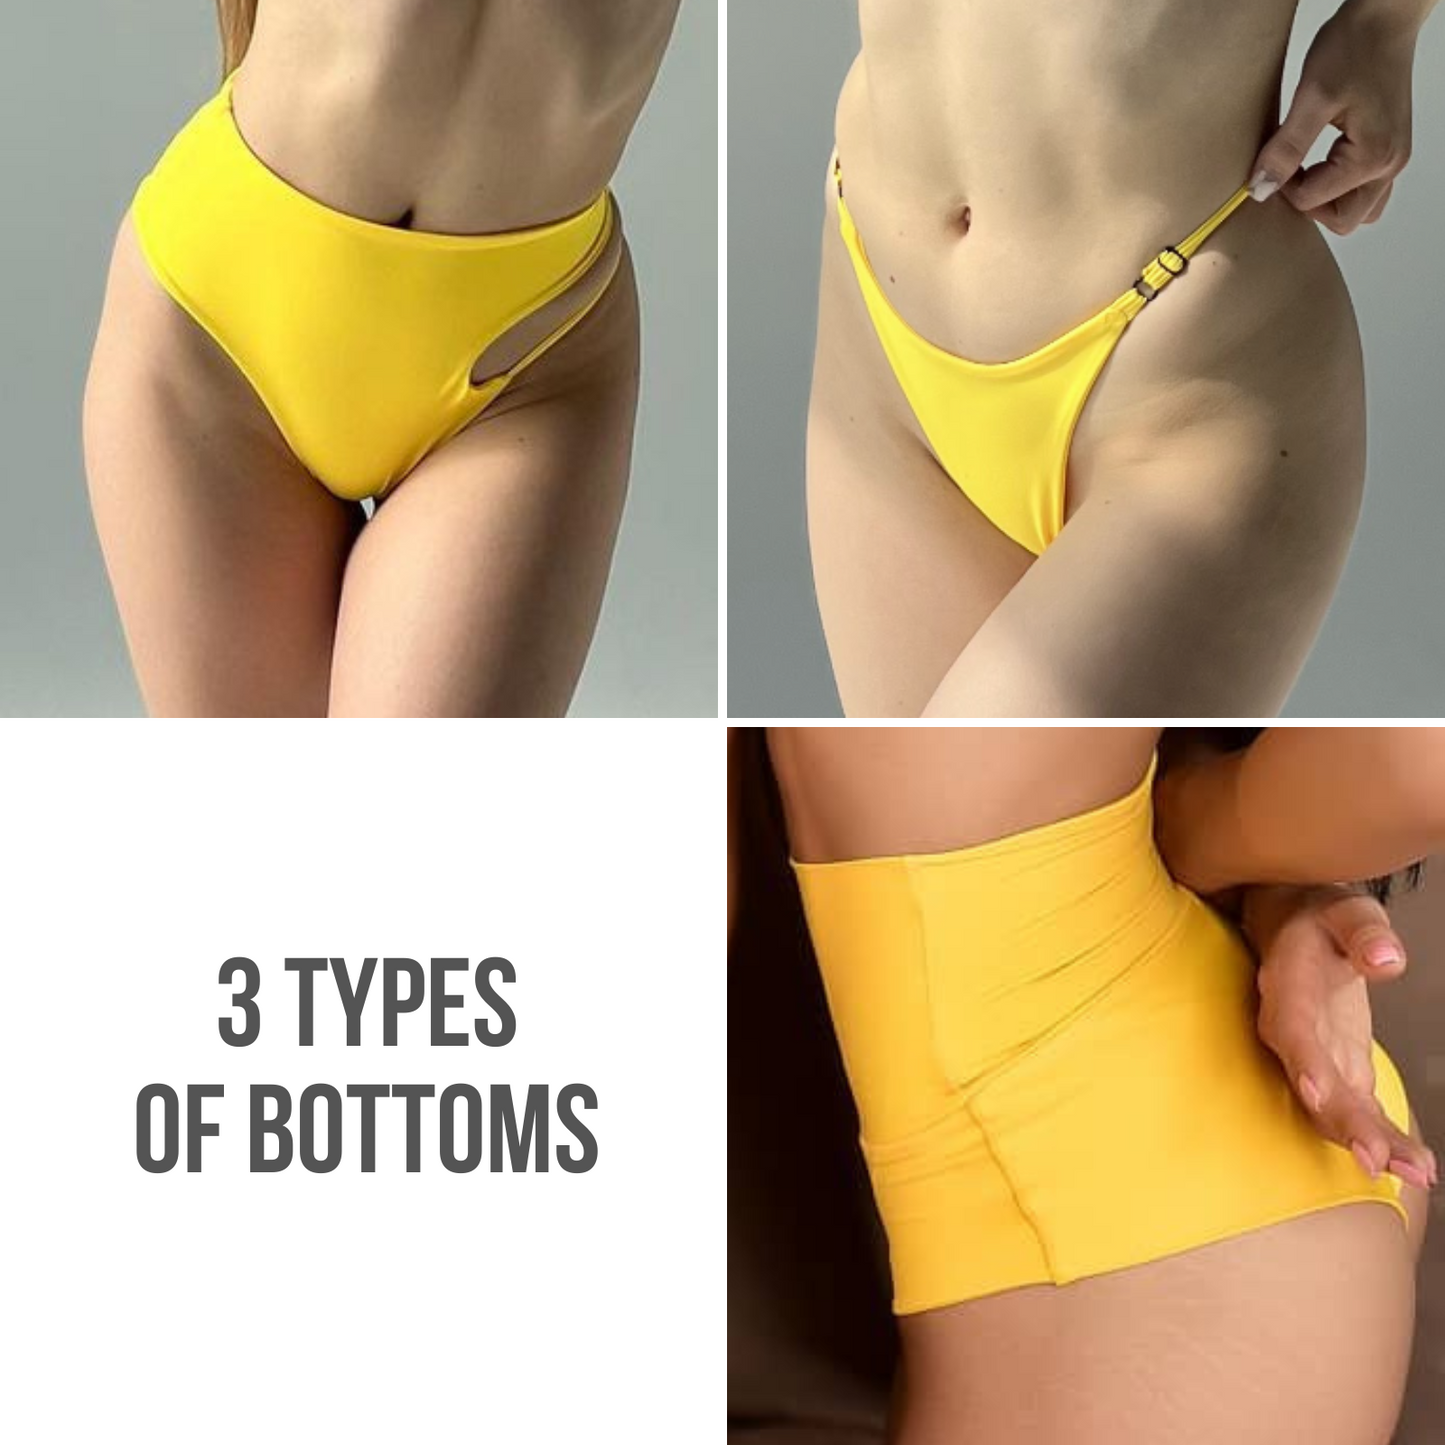 3 types of bottoms